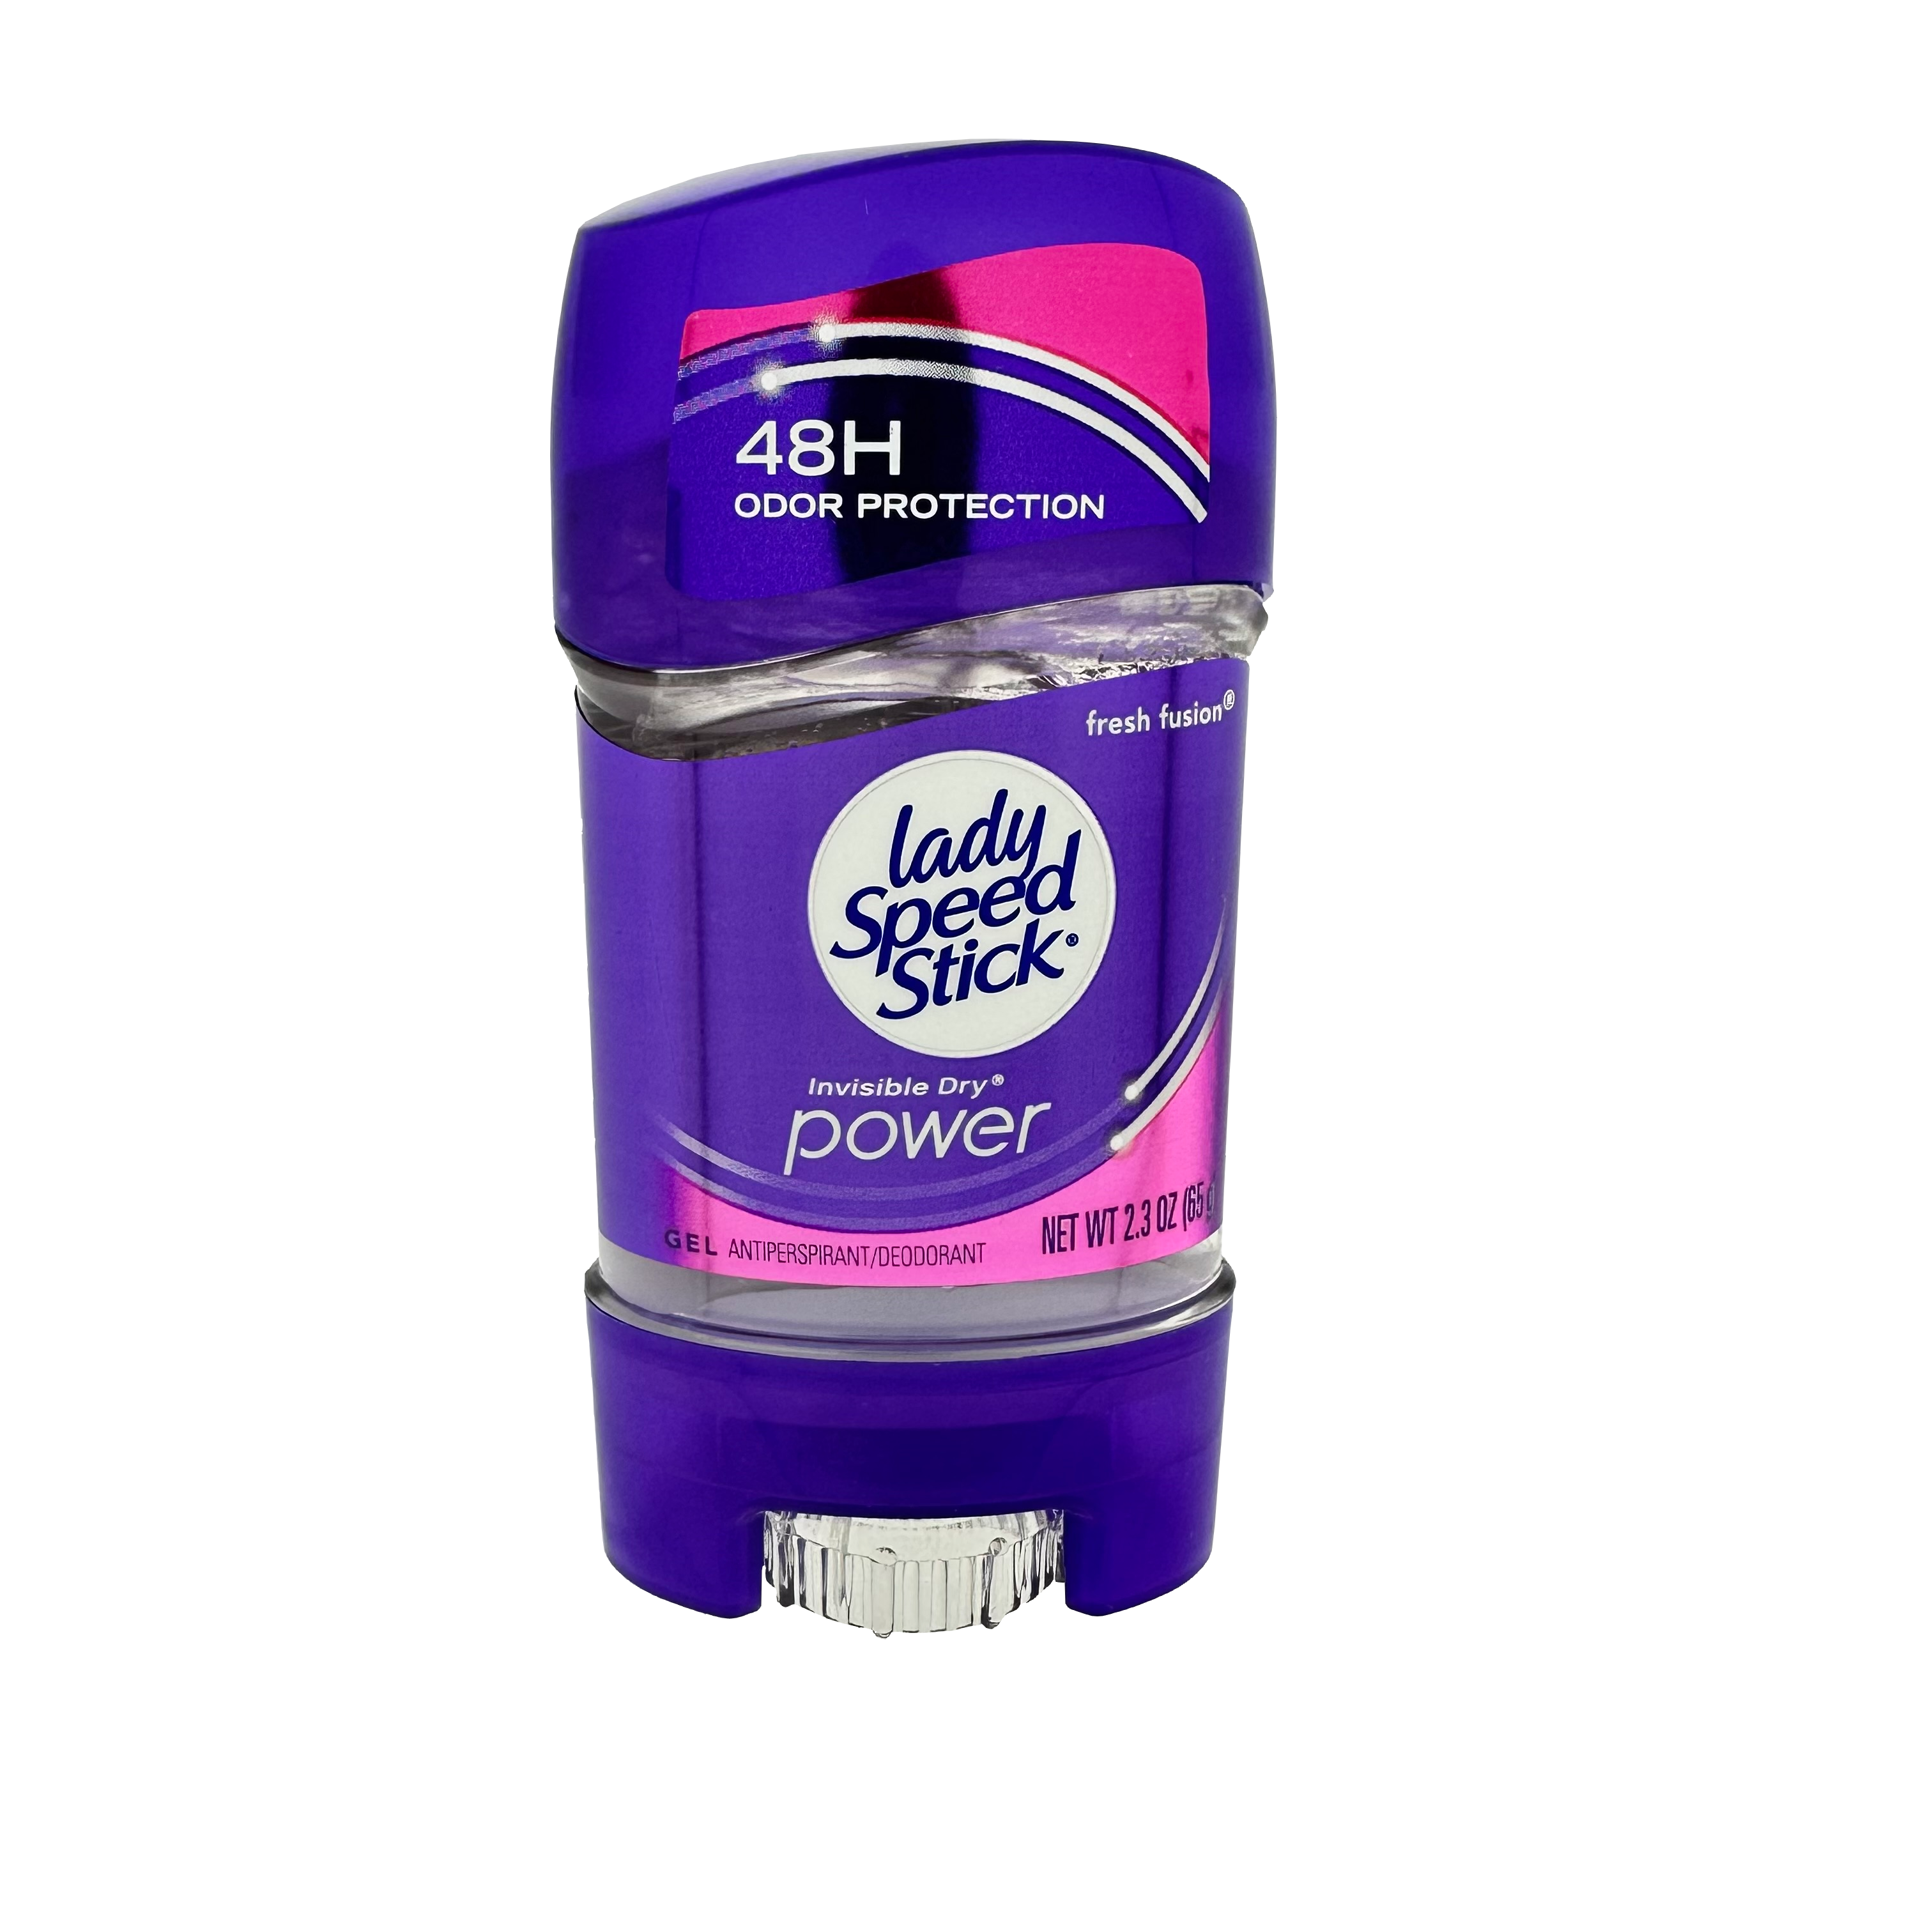 Lady Speed Stick Invisible Dry power deodorant stick 65g